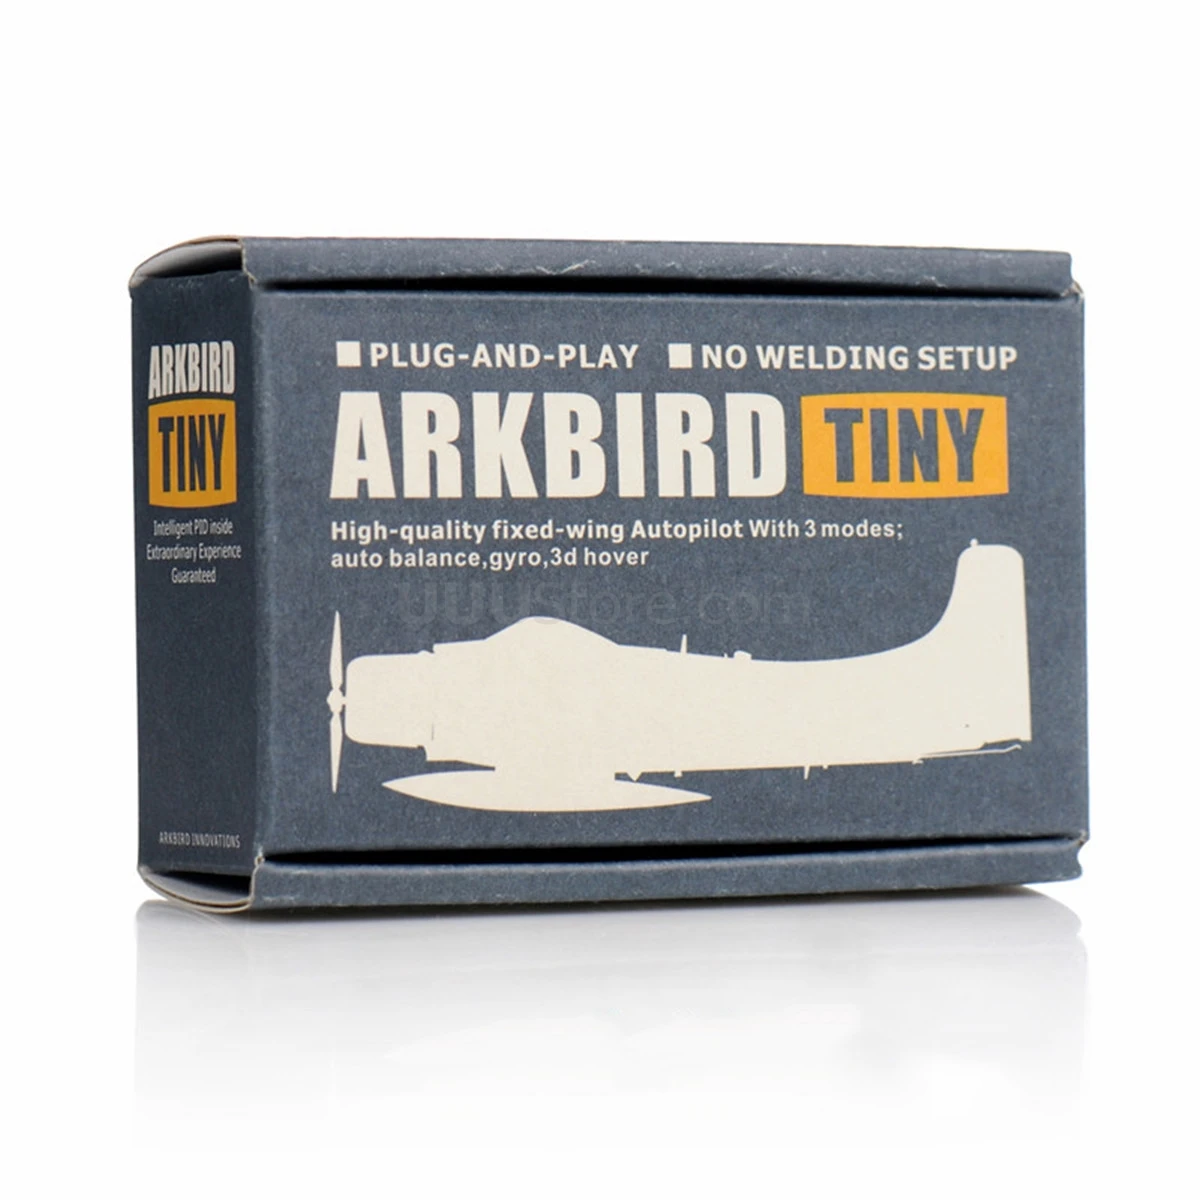 Arkbird Tiny FPV Autopilot and Flight Stablization System Including RTH and Fence designed for fixed-wing model aircraft 2